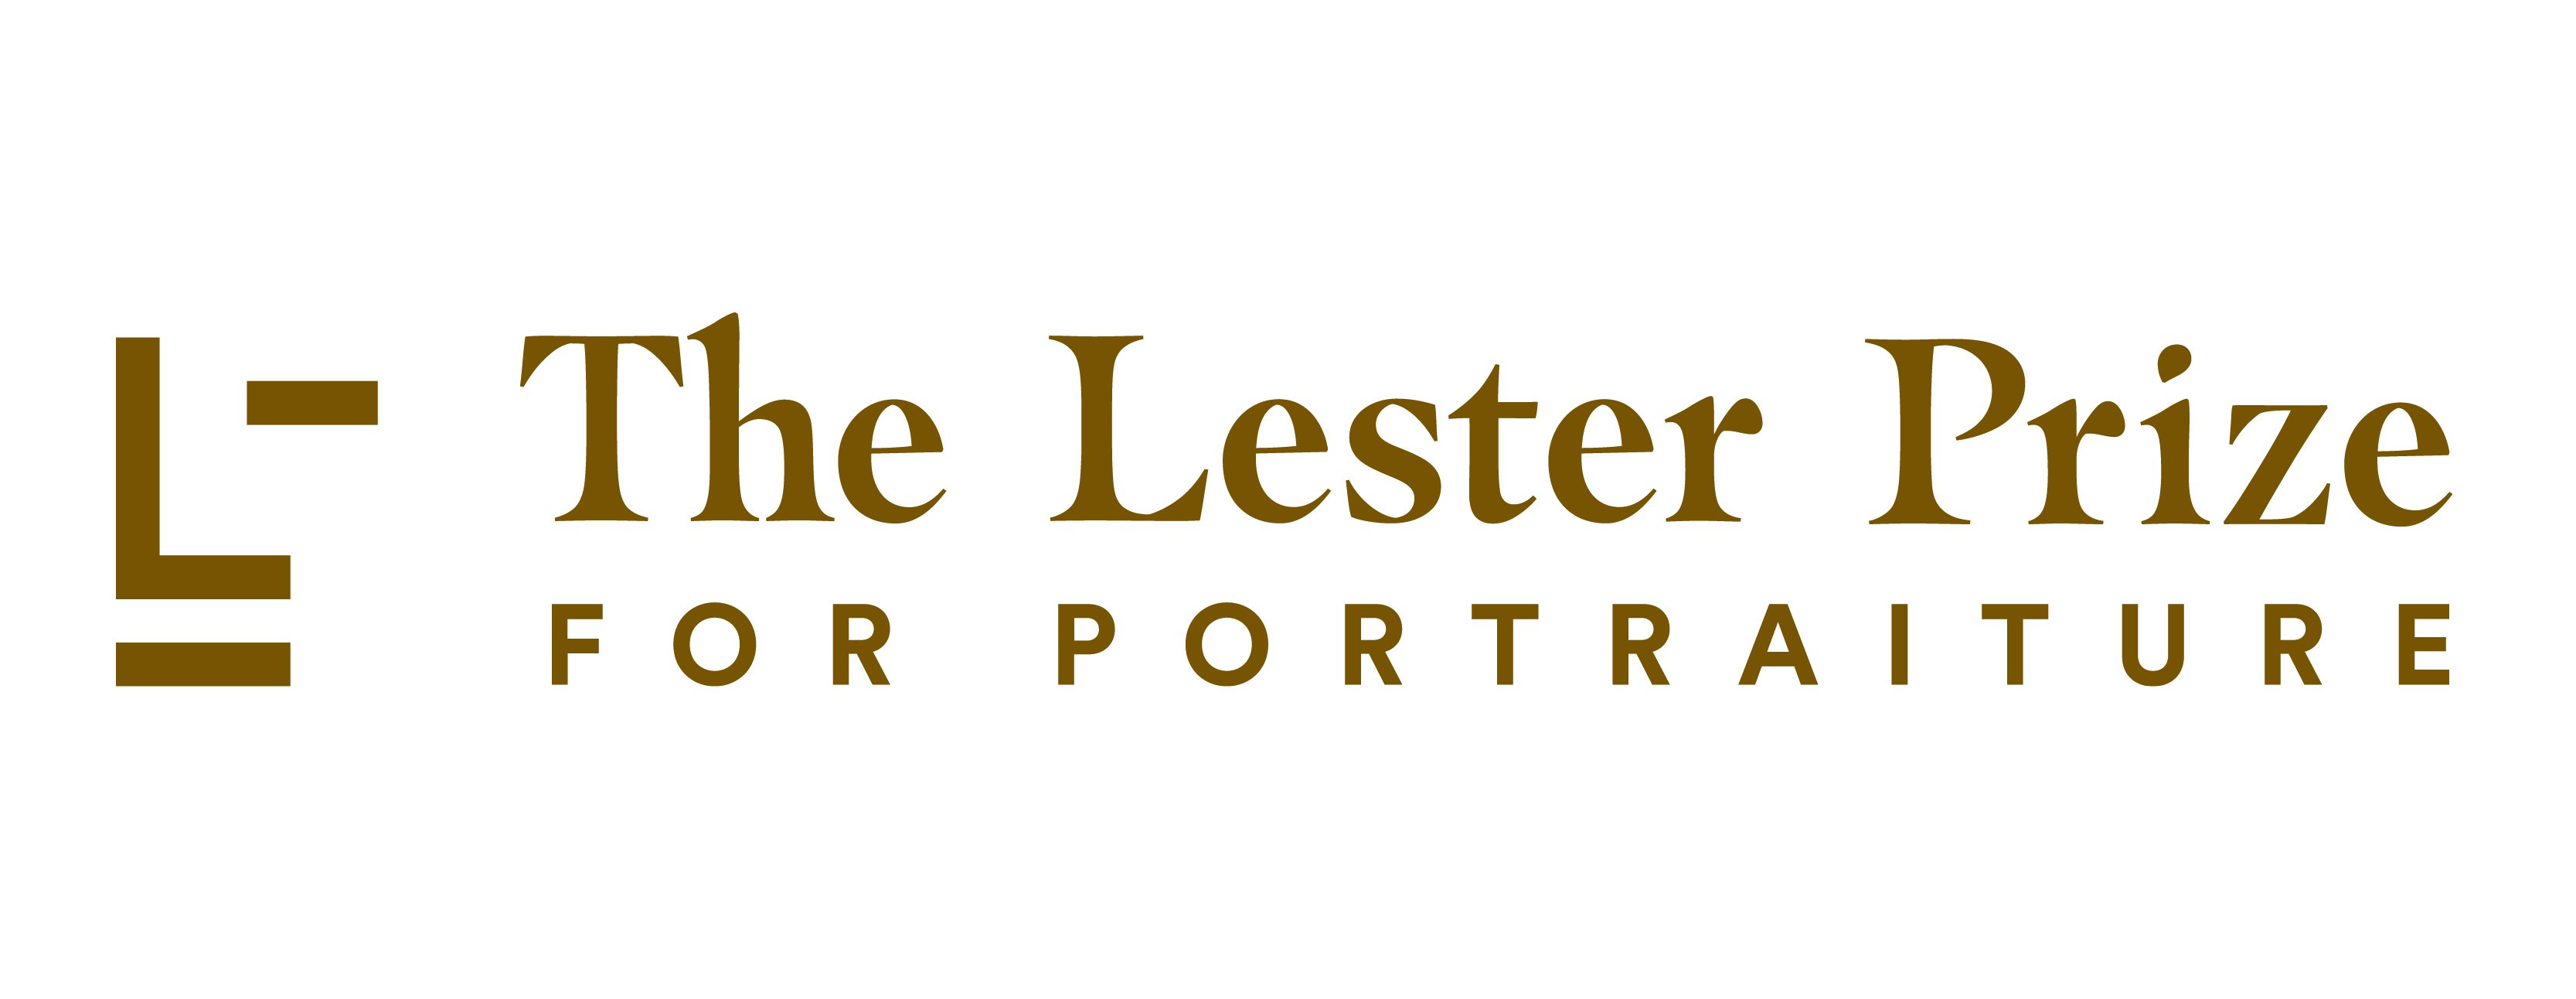 The Lester Prize for Portraiture